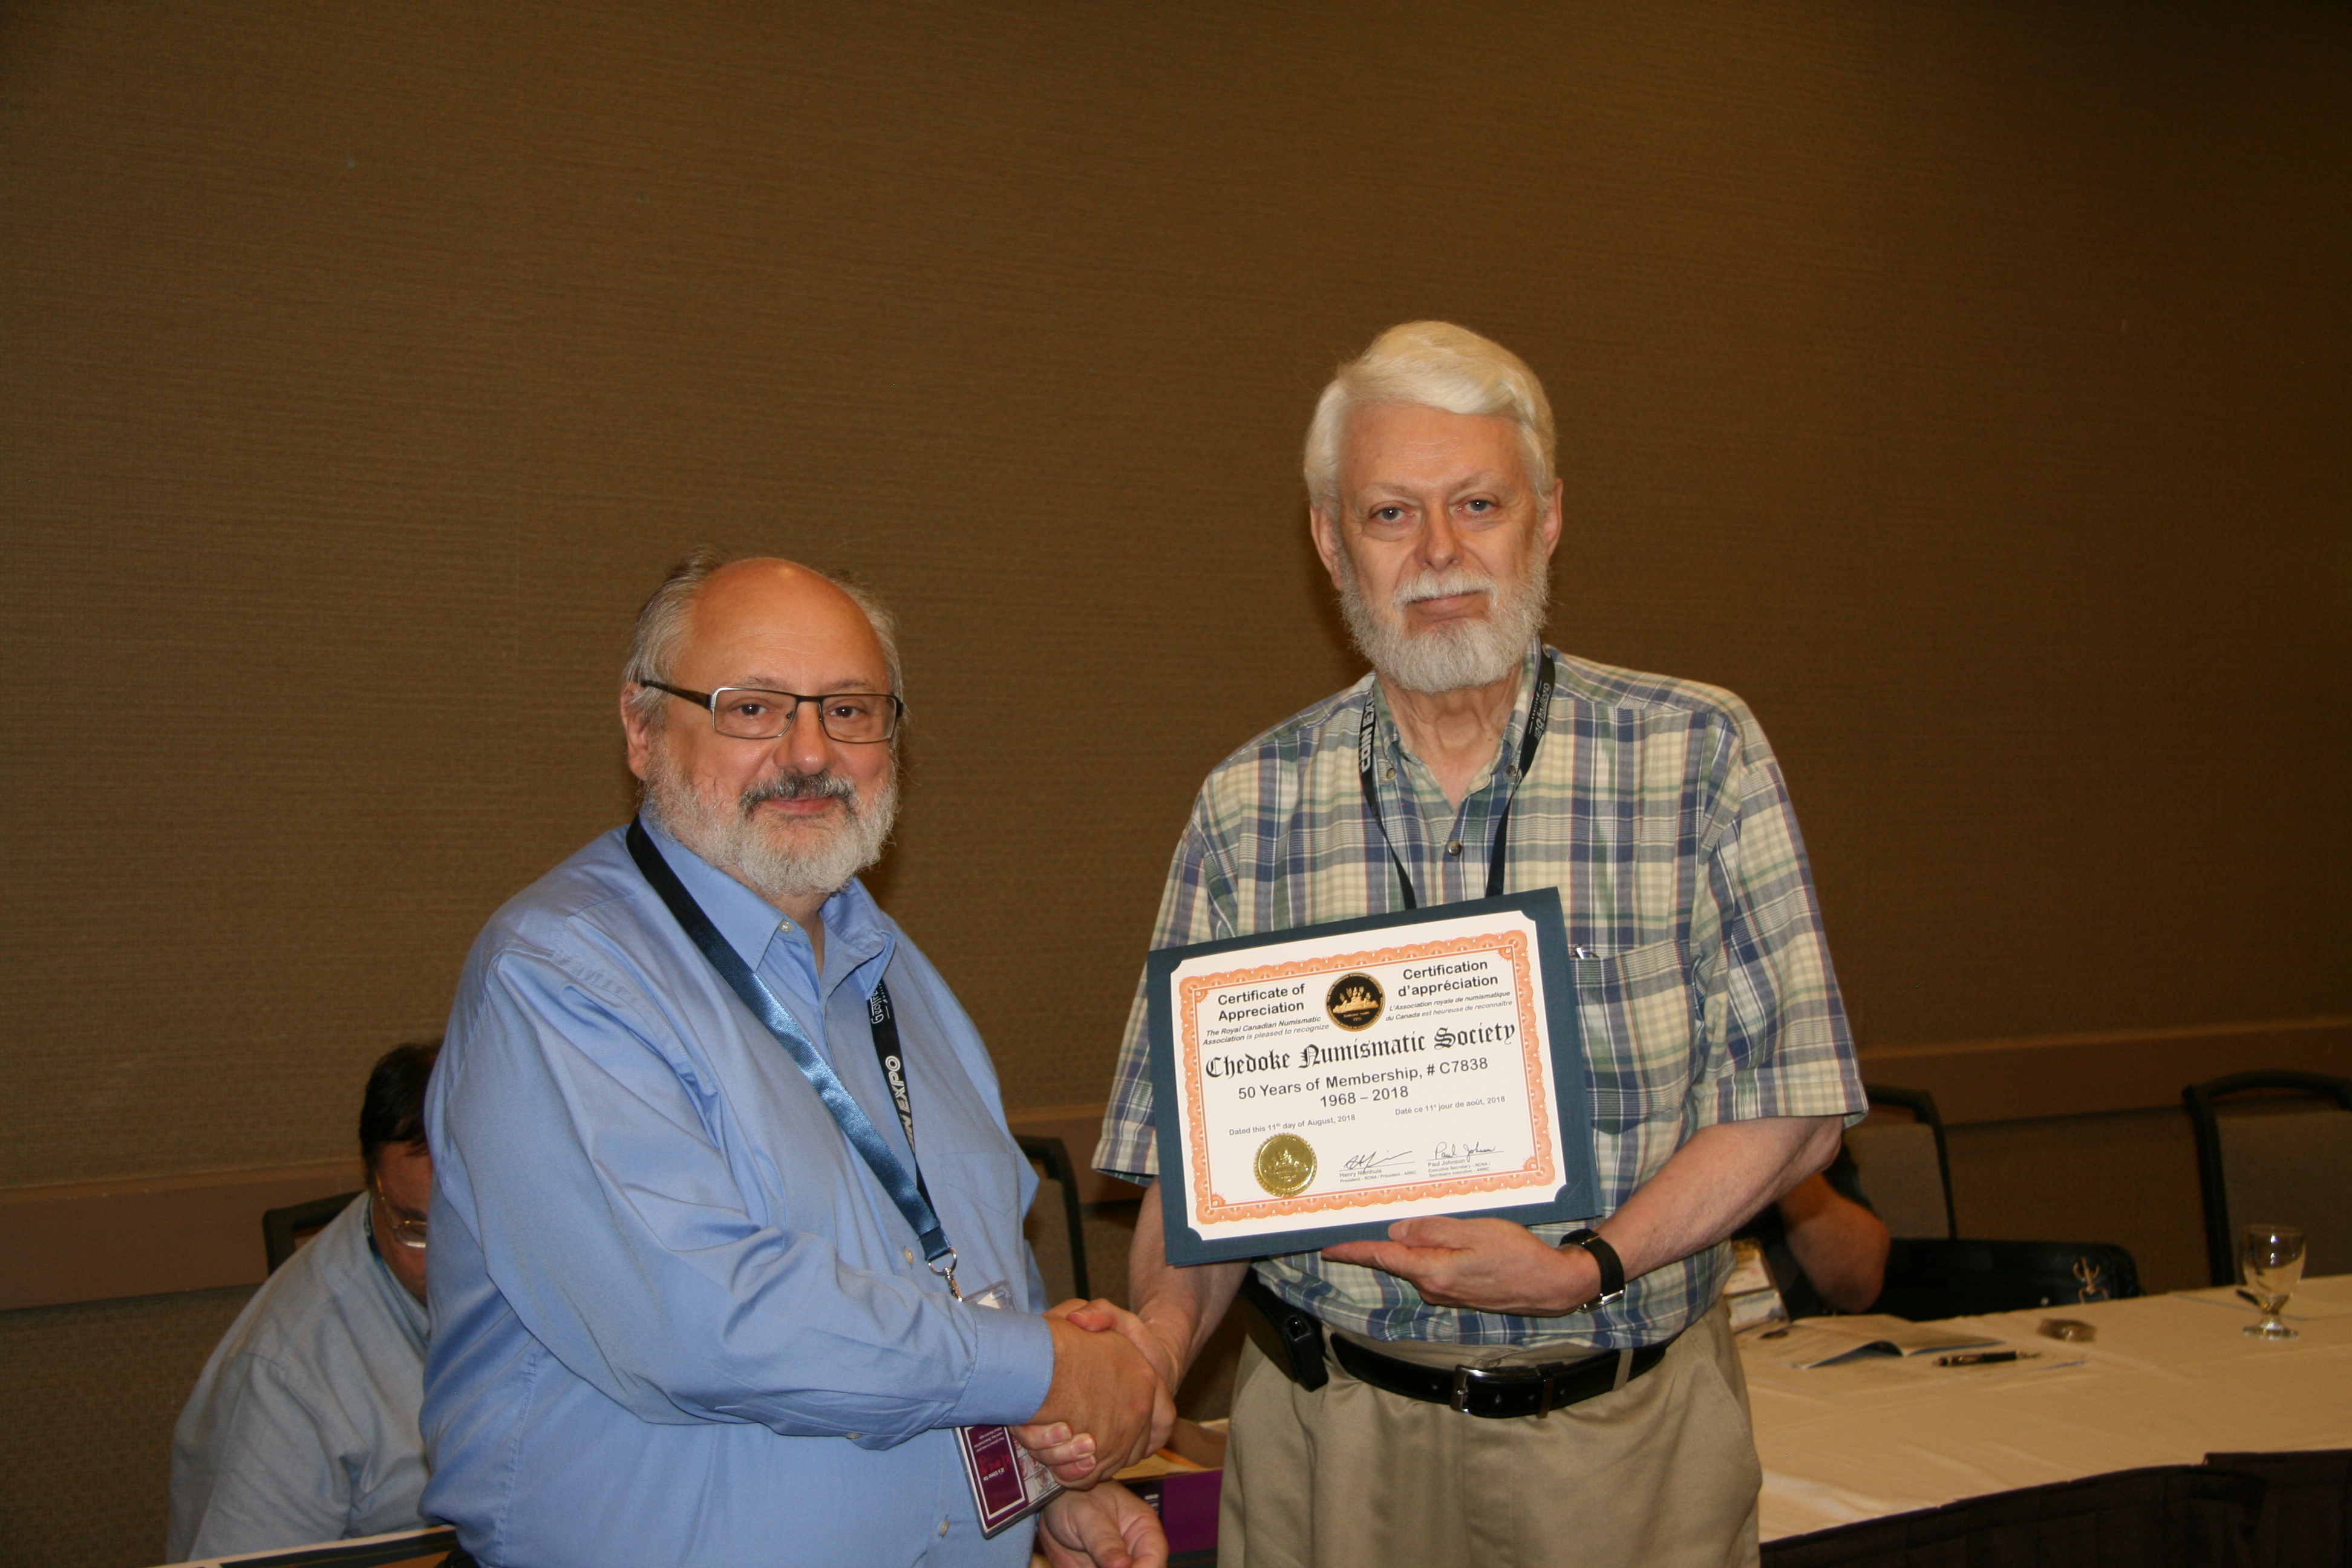 <p><strong>Paul Petch</strong> (left) receiving the 50 years of membership recognition award for the <strong>Chedoke Numismatic Society</strong> from <strong>Henry Nienhuis</strong> (right).<br /> <small>Dan Gosling photo</small></p>